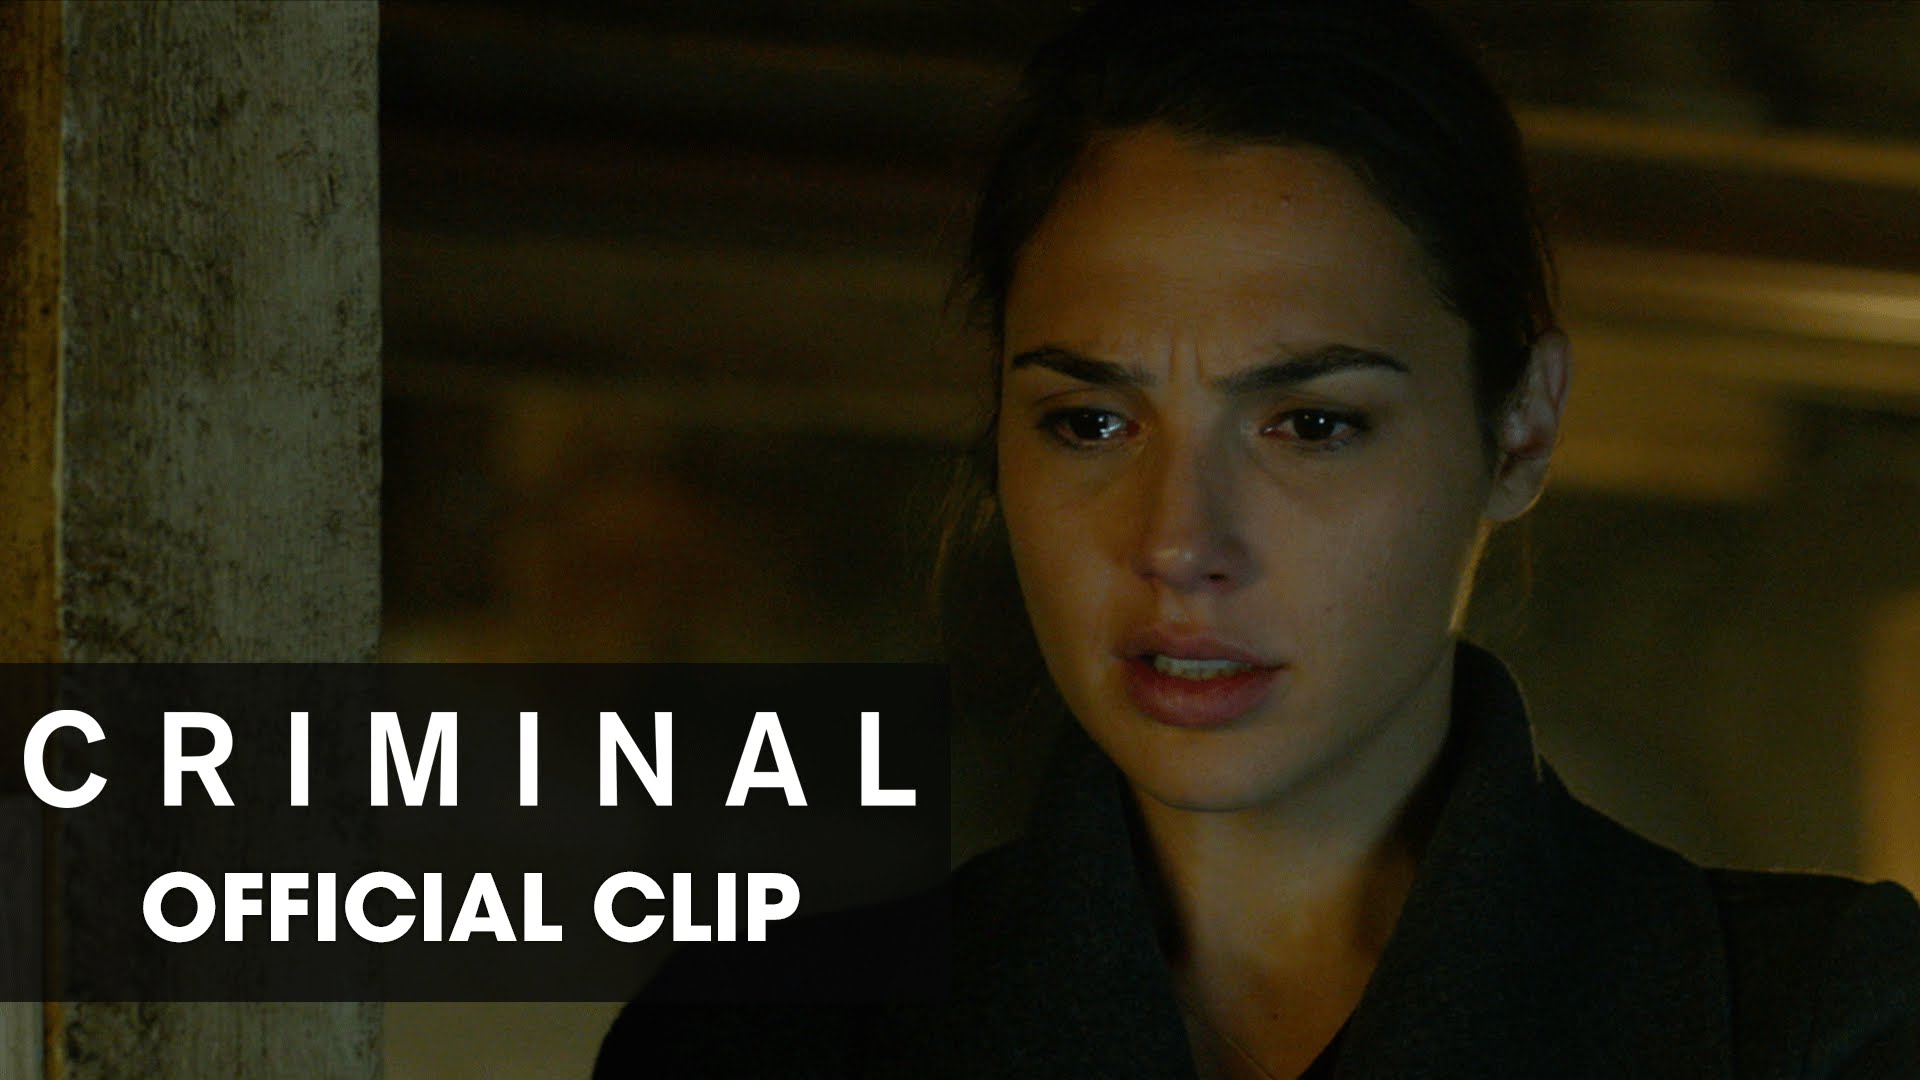 Criminal (2016 Movie) Official Clip – “In My Head”